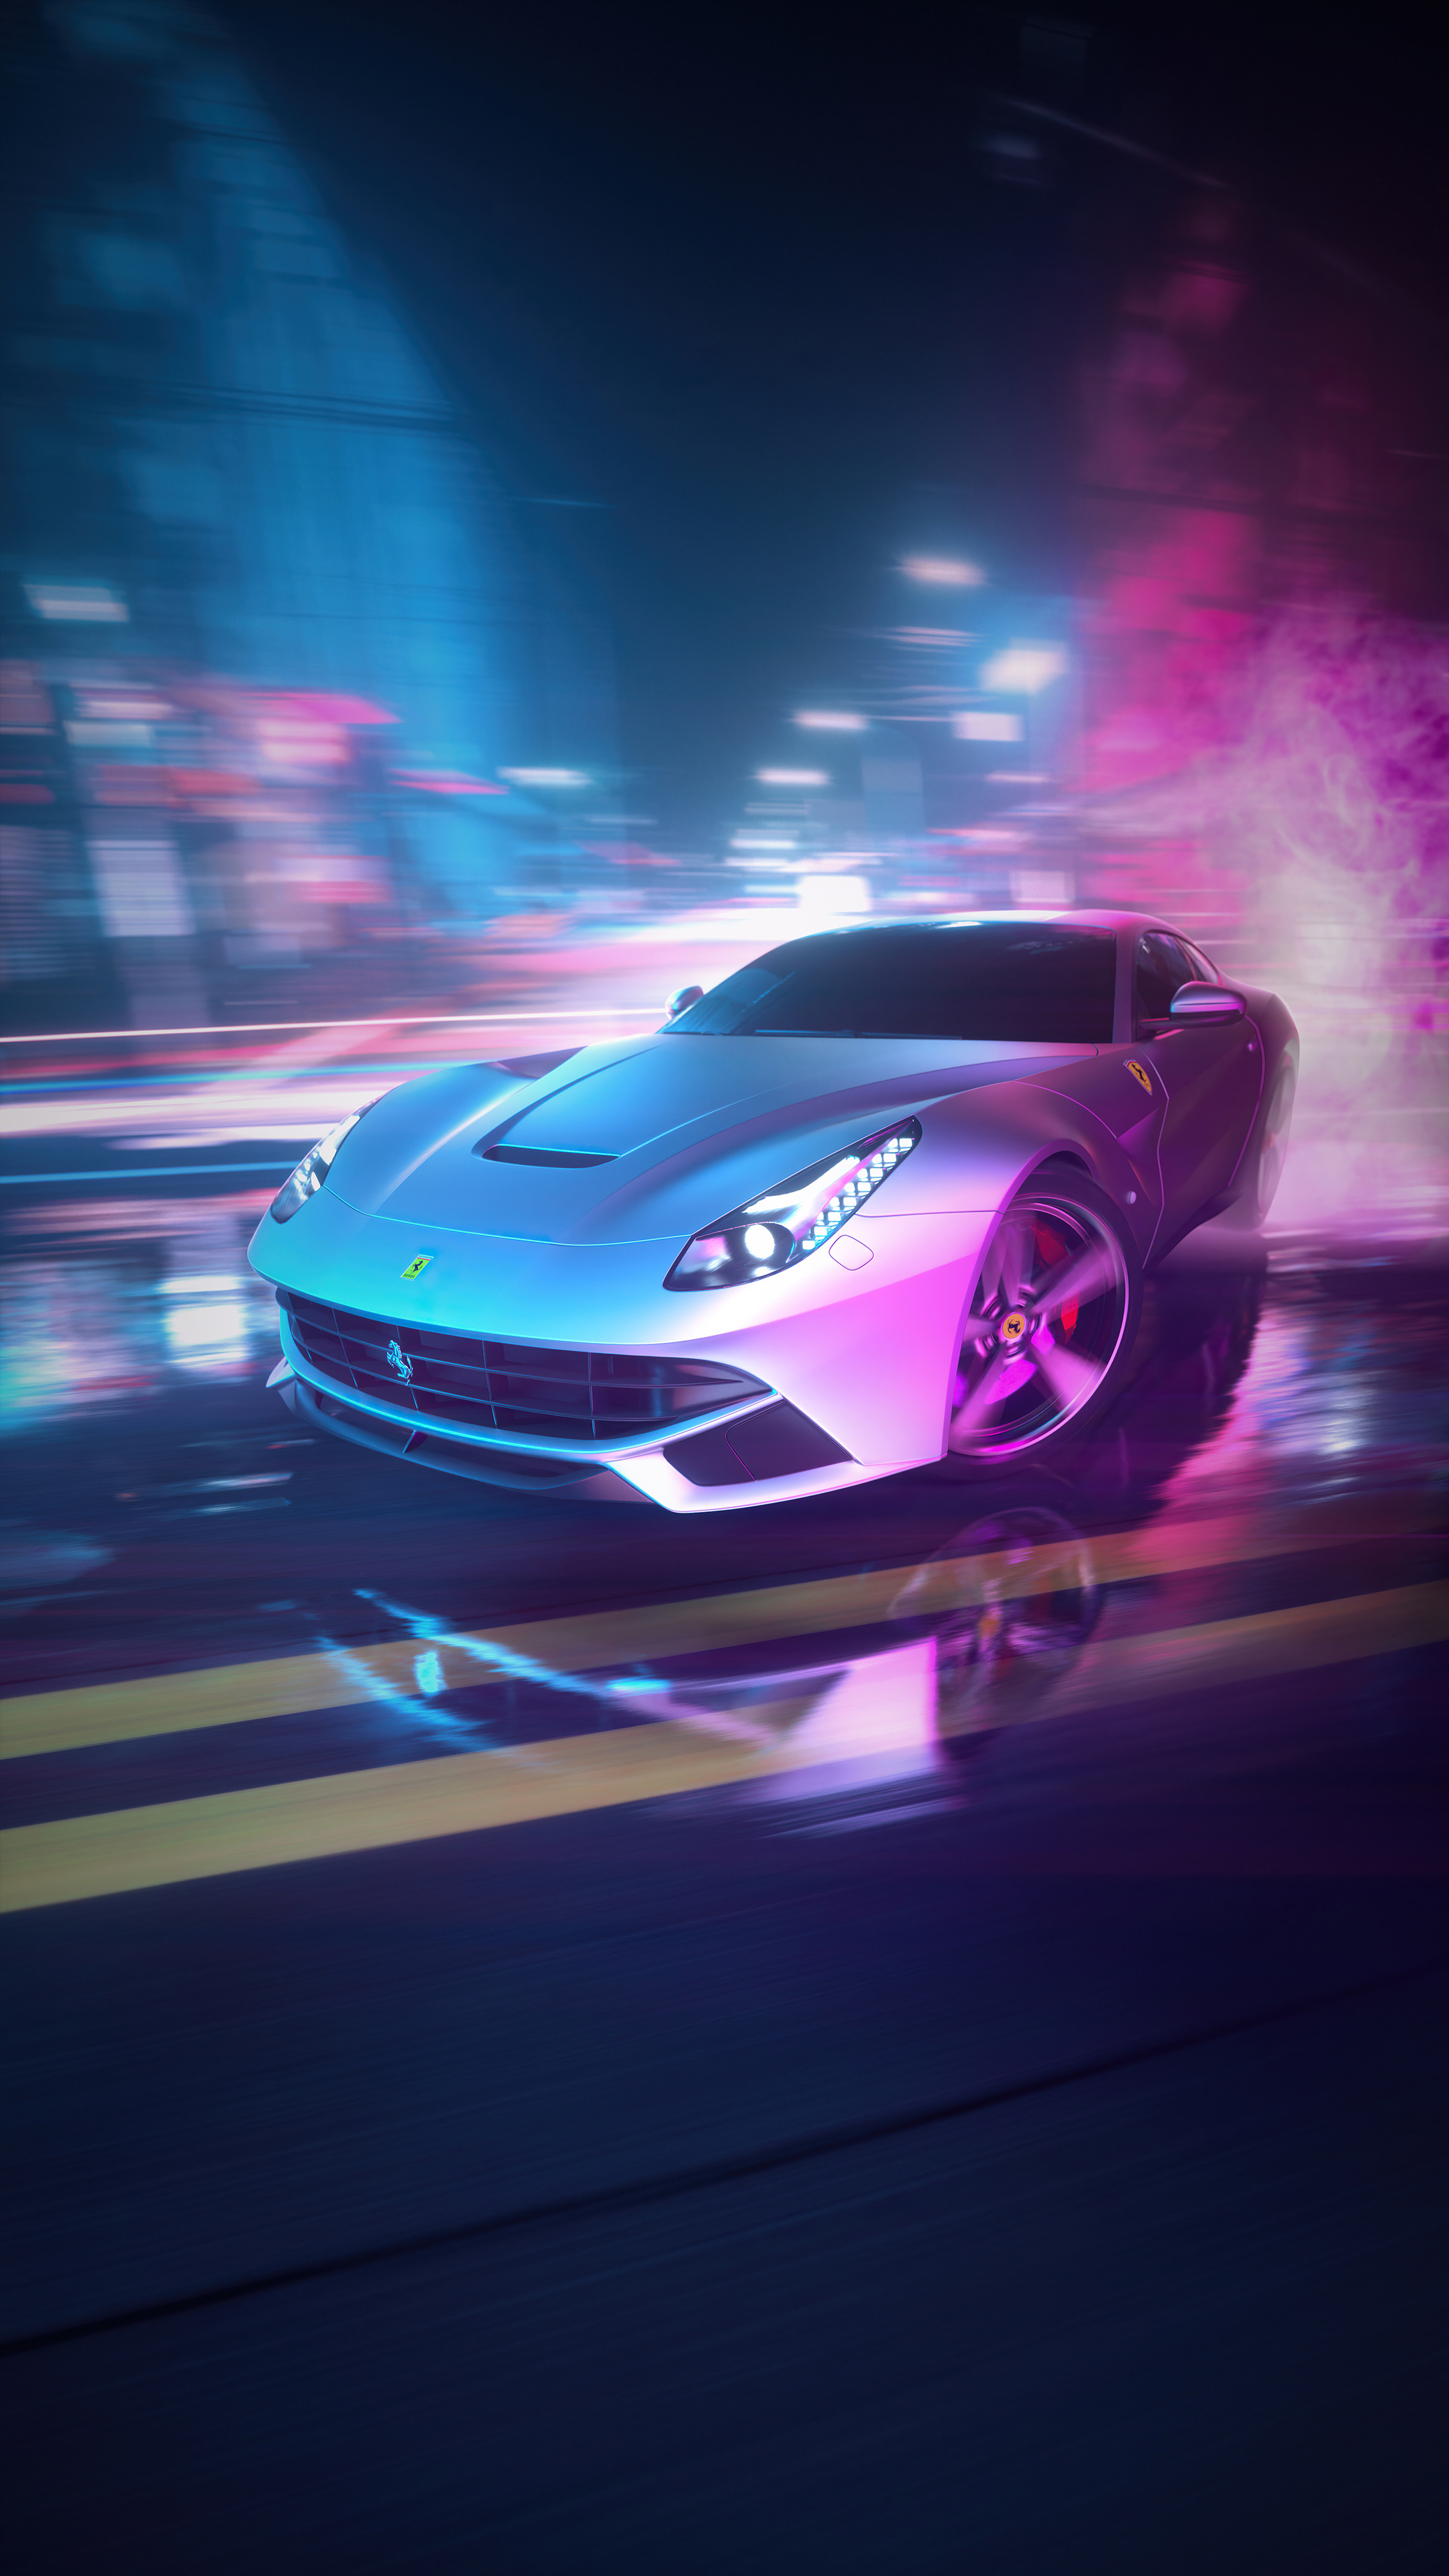 Drifting: Oversteered Ferrari on the streets of a night city, Supercar racing. 2160x3840 4K Background.